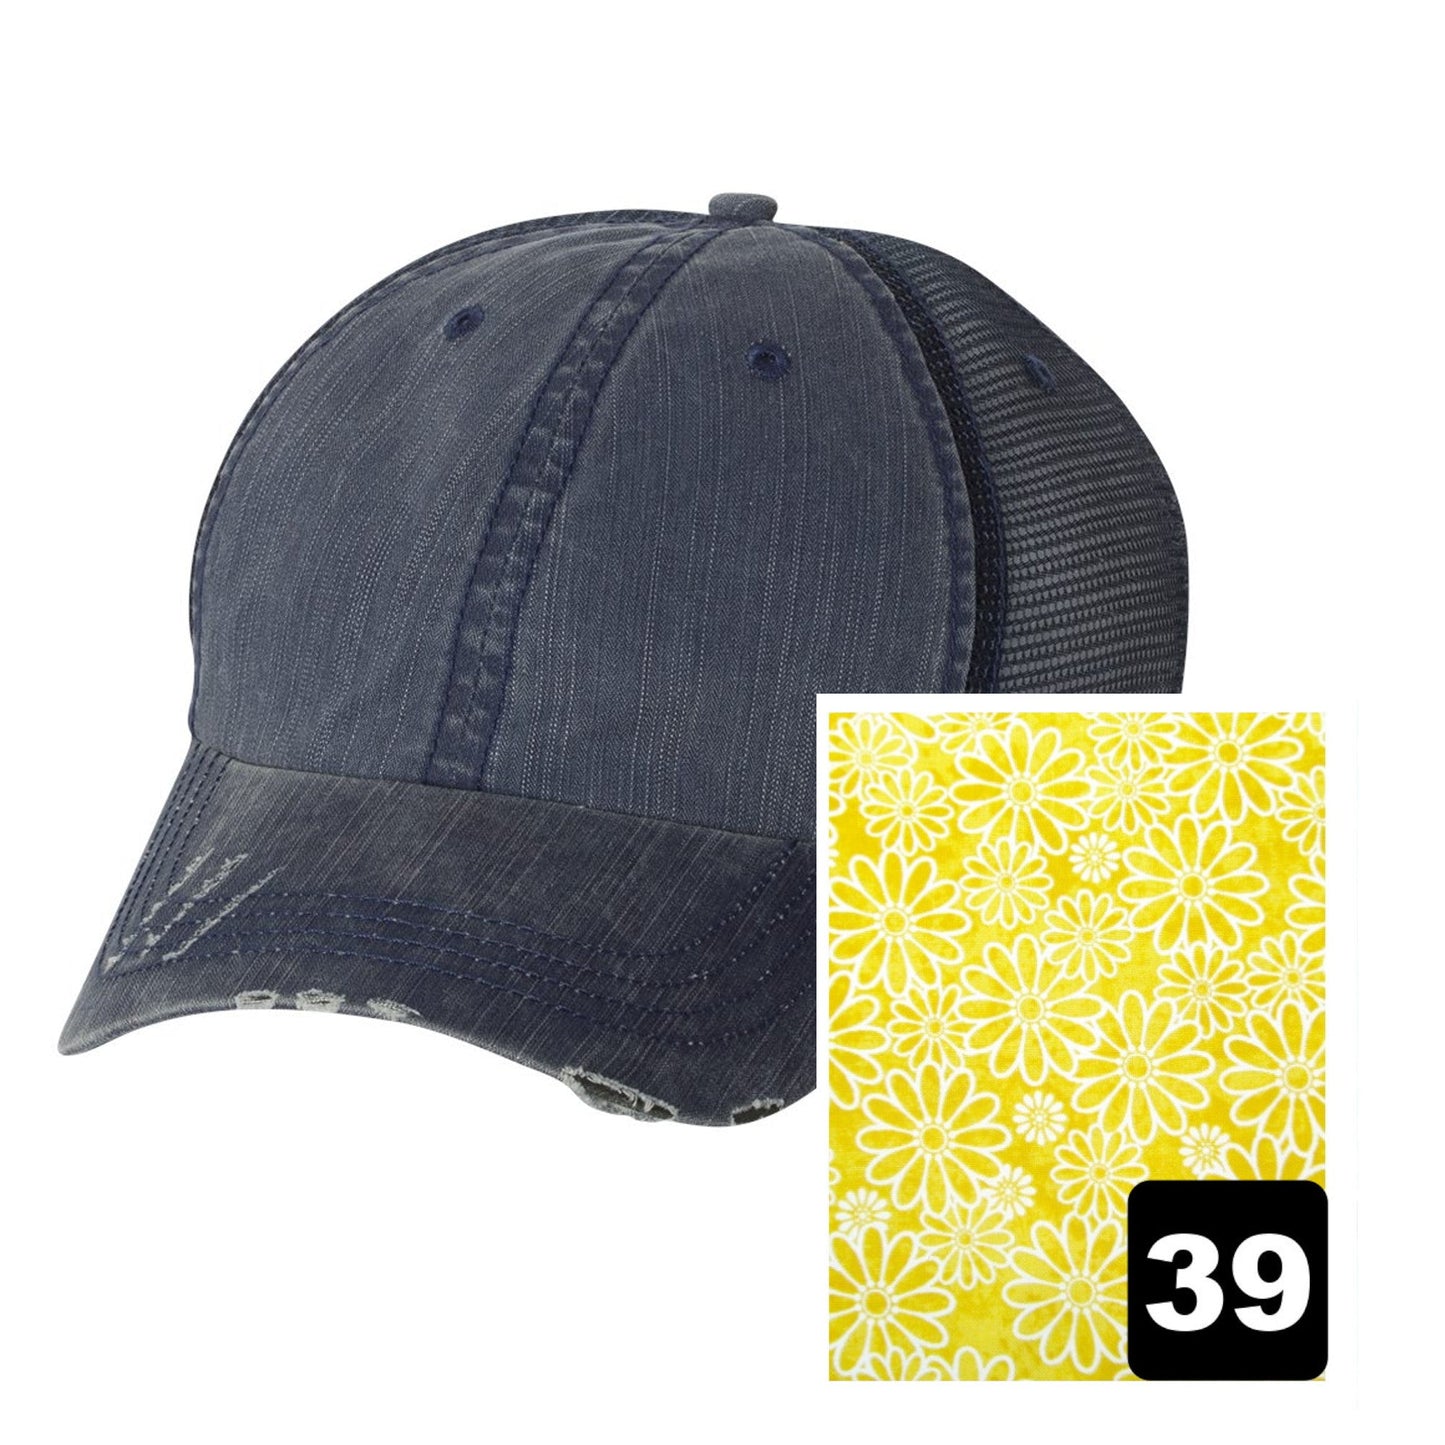 Maryland Hat | Navy Distressed Trucker Cap | Many Fabric Choices